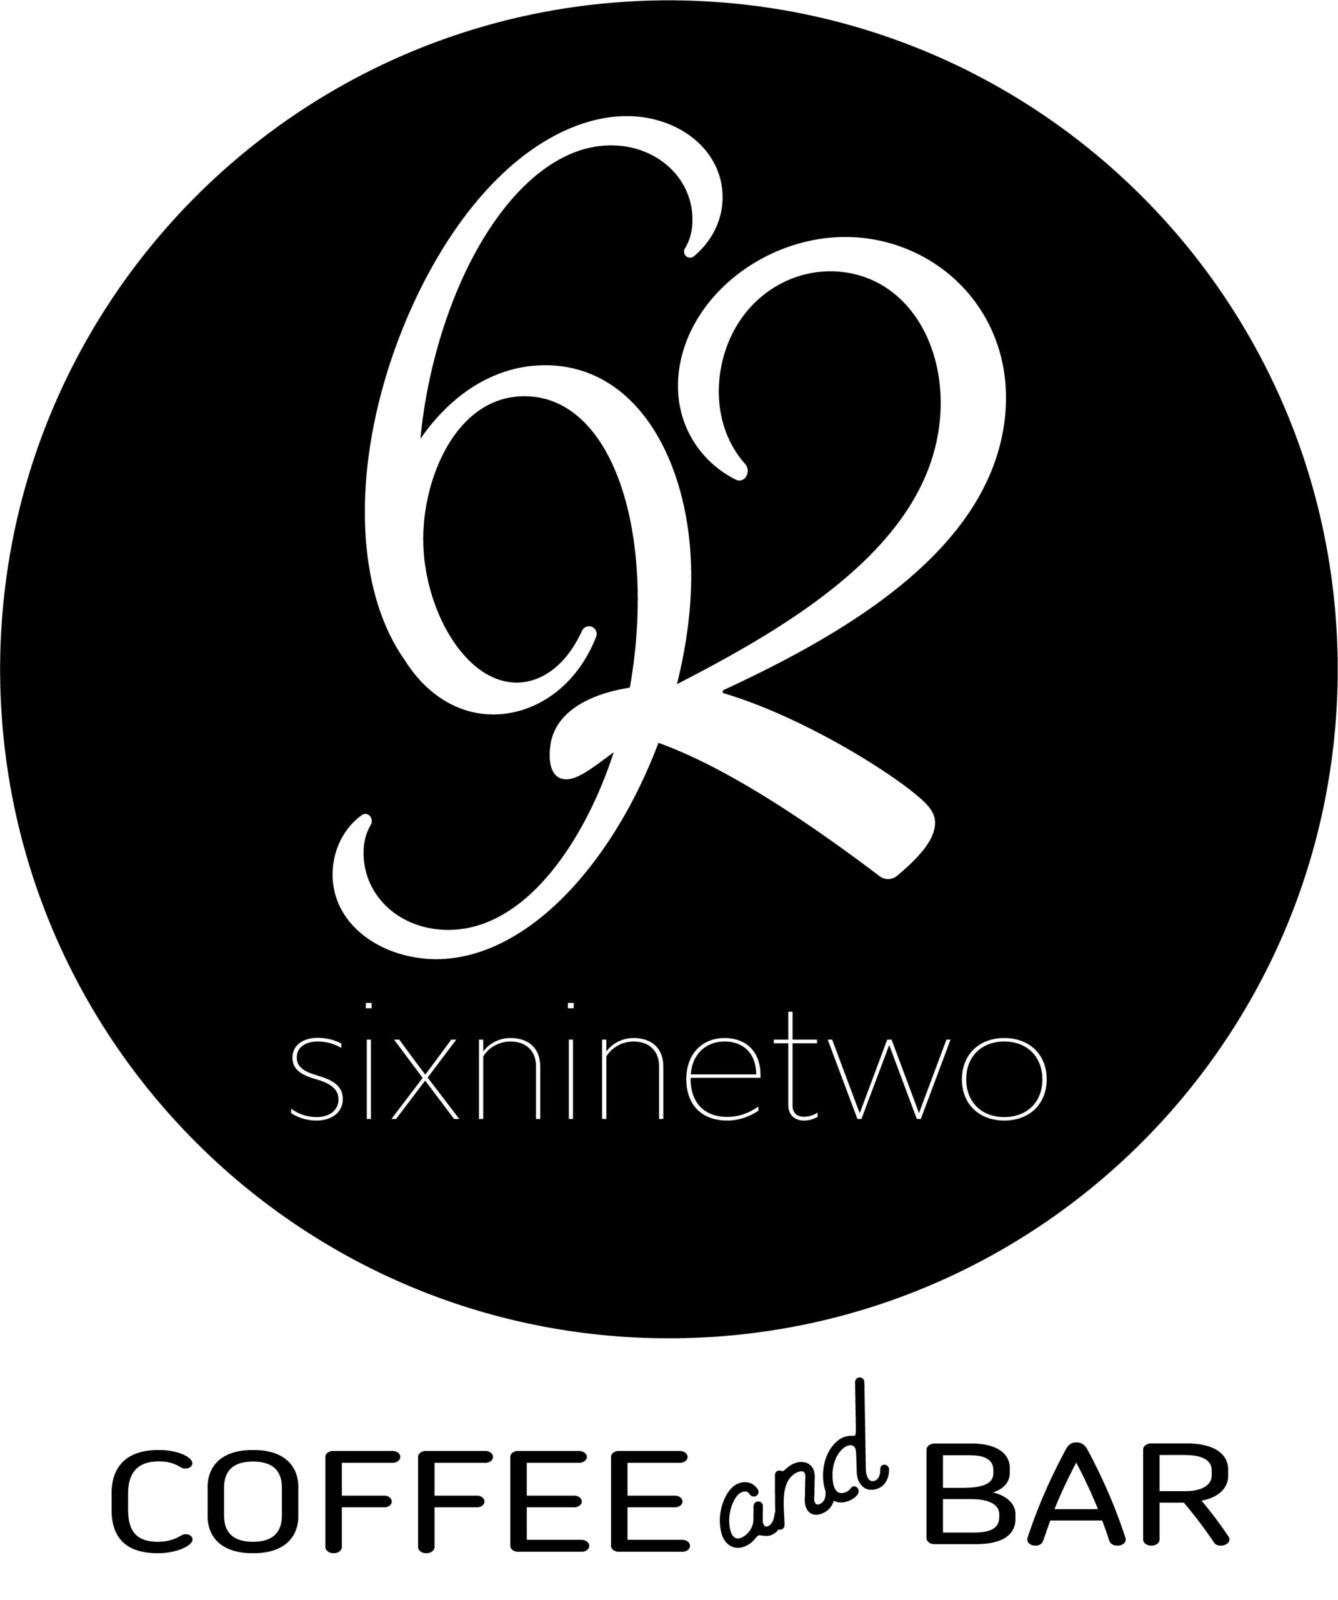 692 Coffee and Bar logo - Business in Manotick